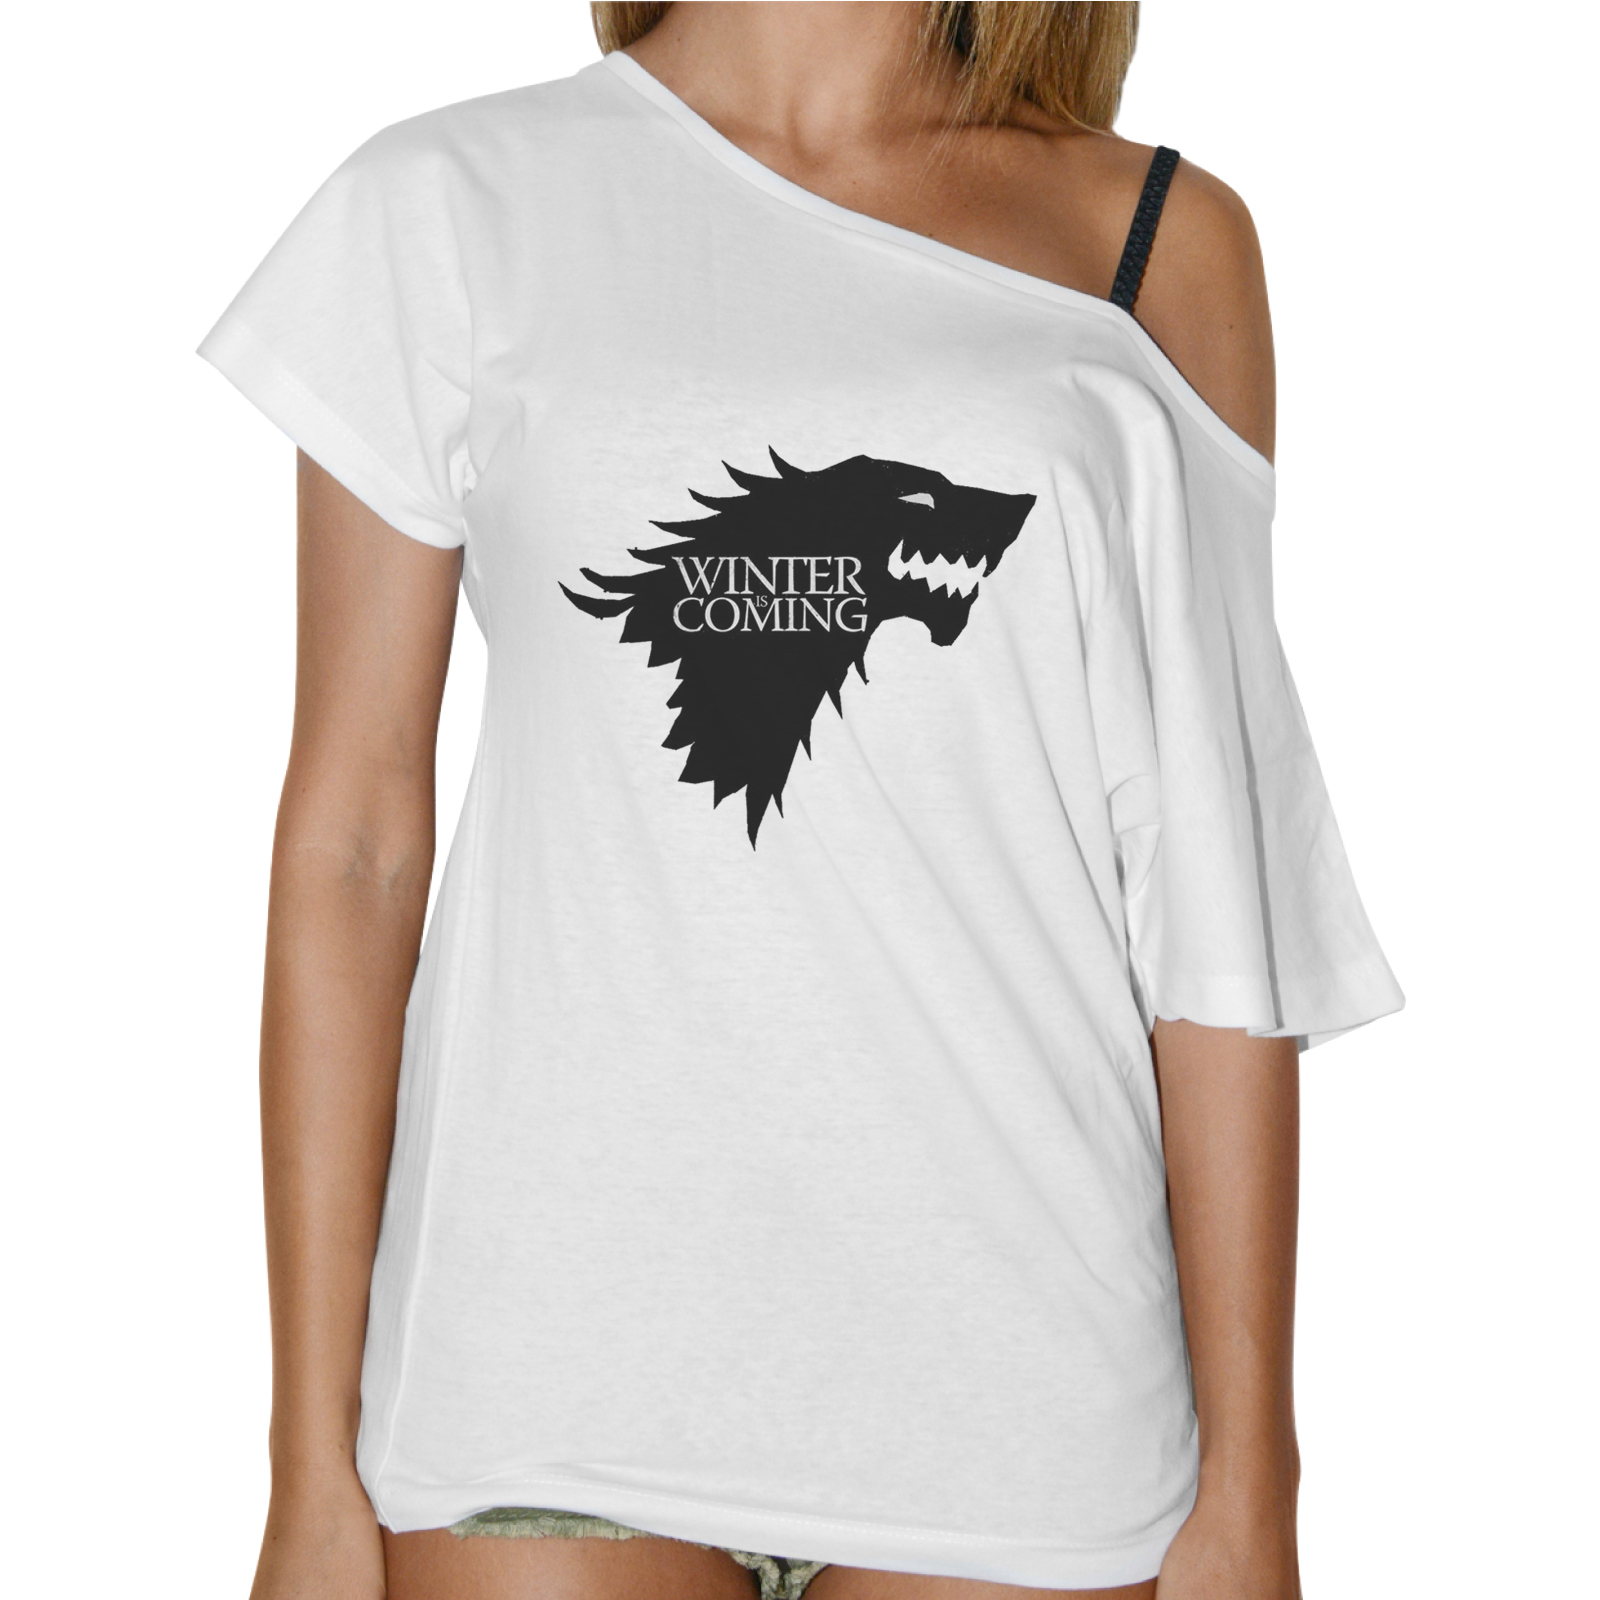 T-Shirt Donna Collo Barca WINTER IS COMING